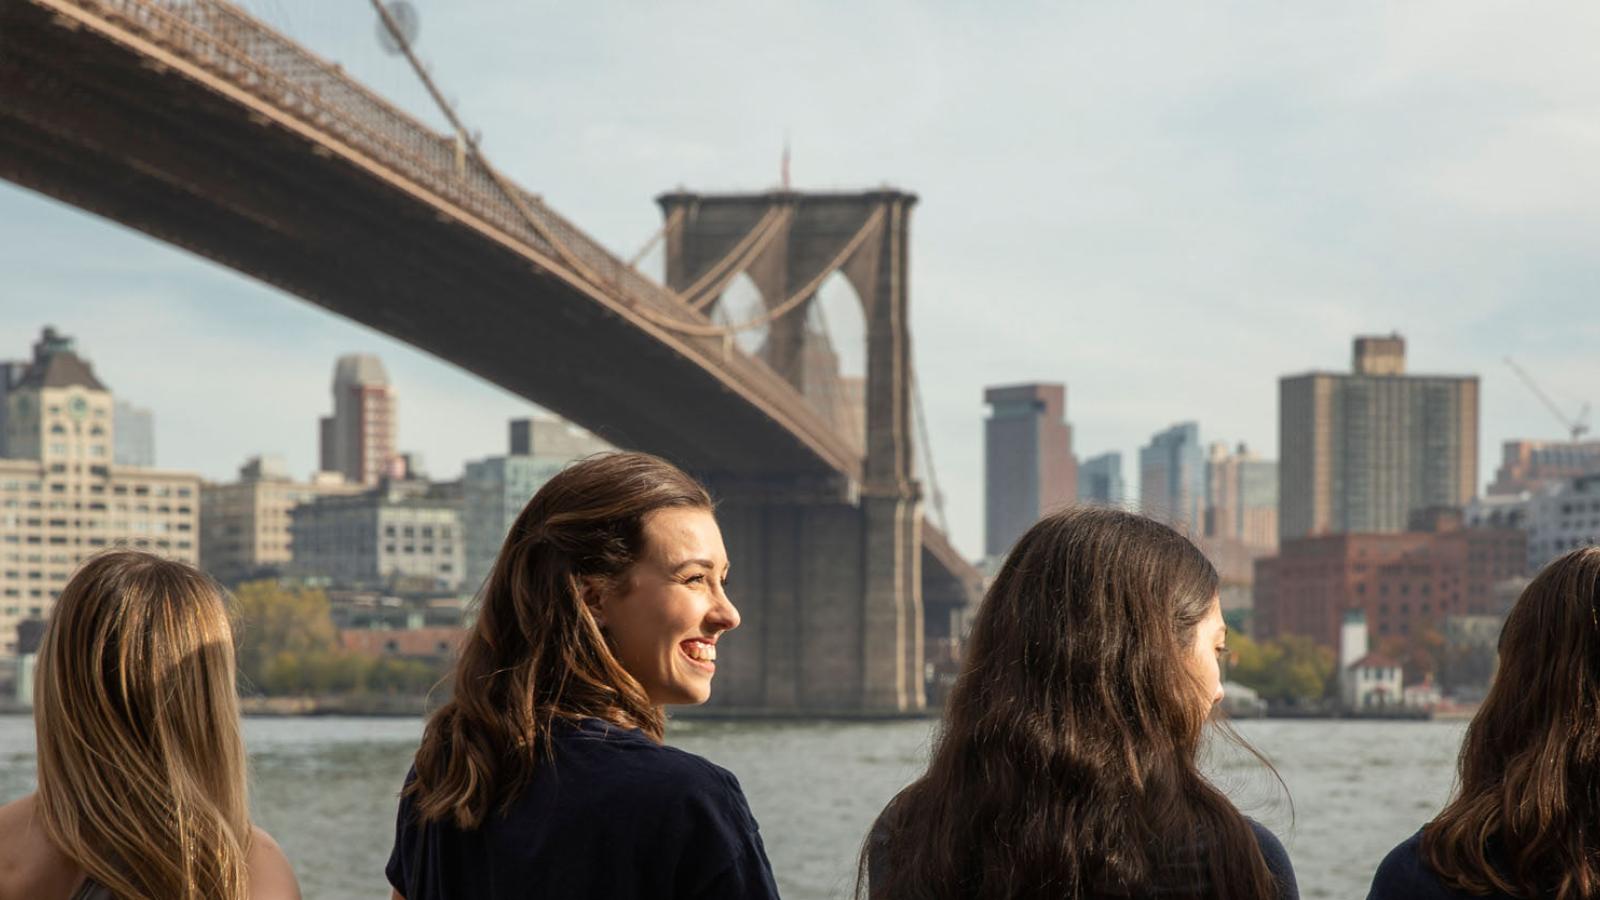 Pace University students standing in front of the Brooklyn Bridge in Manhattan